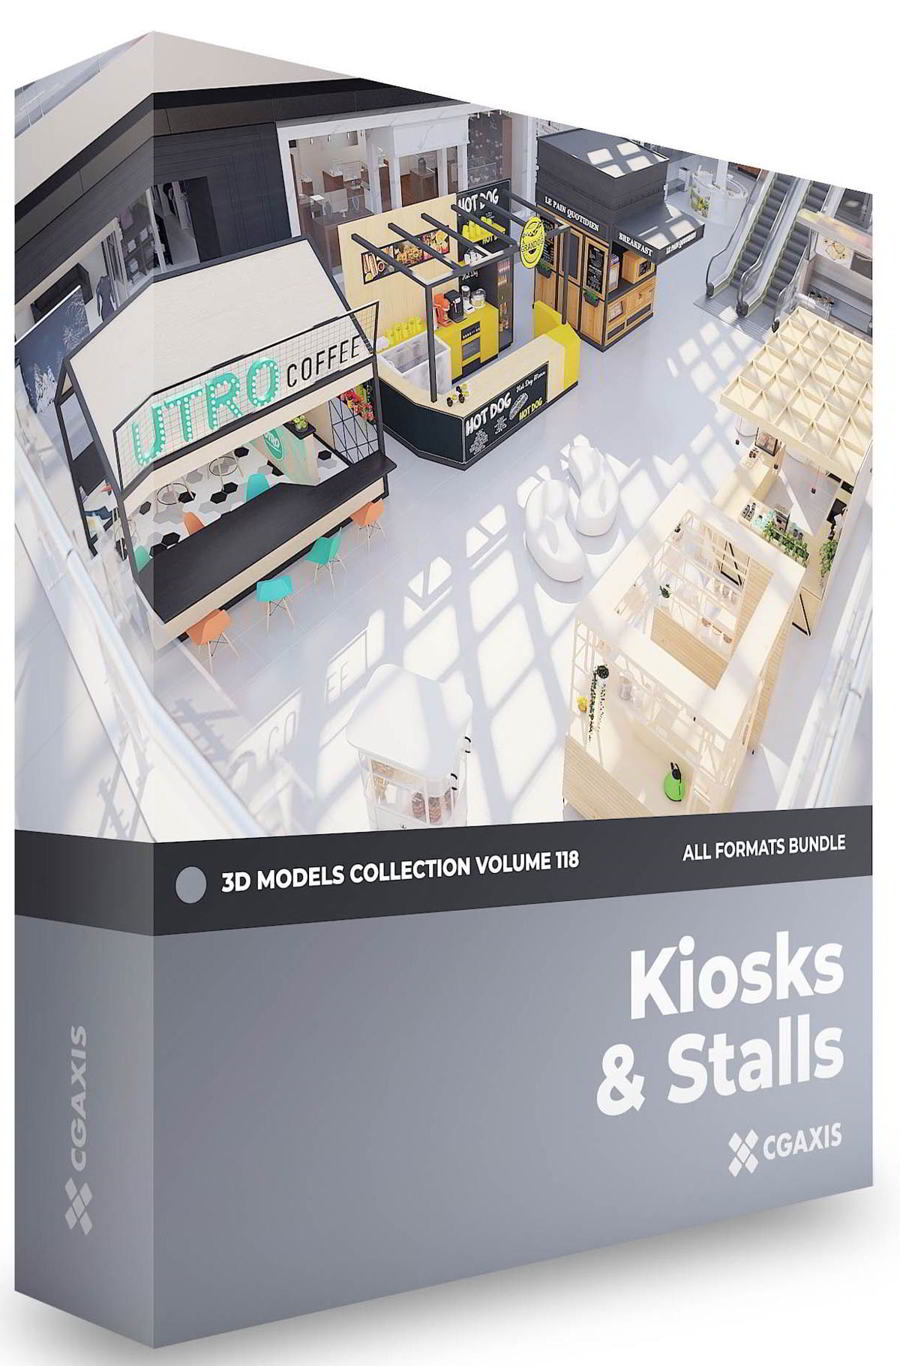 CGAxis – Kiosks & Stalls 3D Models Collection – Volume 118 free download